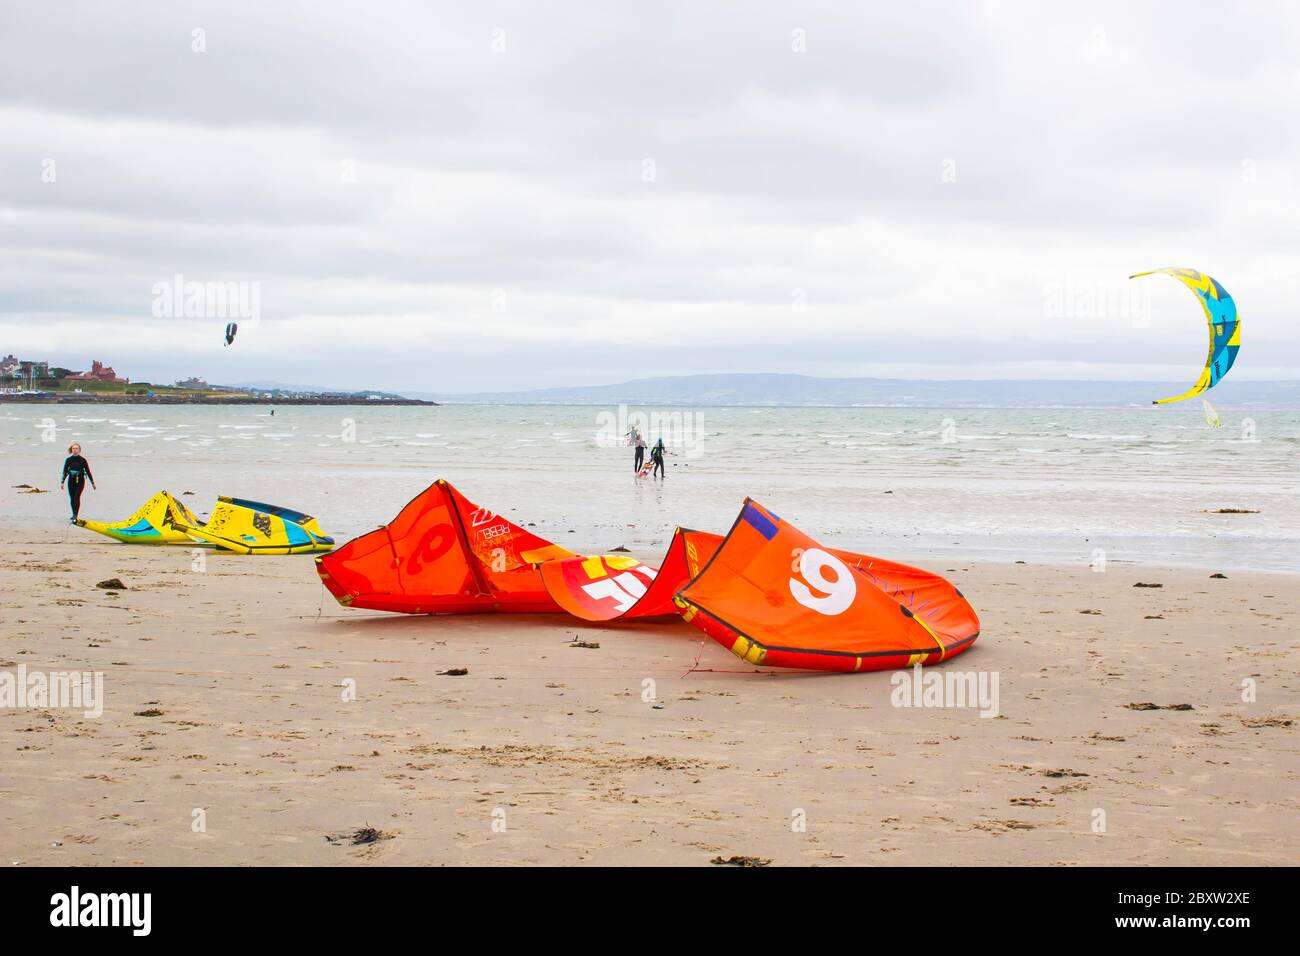 6 June 2020 Kite surfers and wind surfers enjoy the wind, waves and surf at Ballyholme Beach in Bangor Northern Ireland on a dull afternoon during the Stock Photo